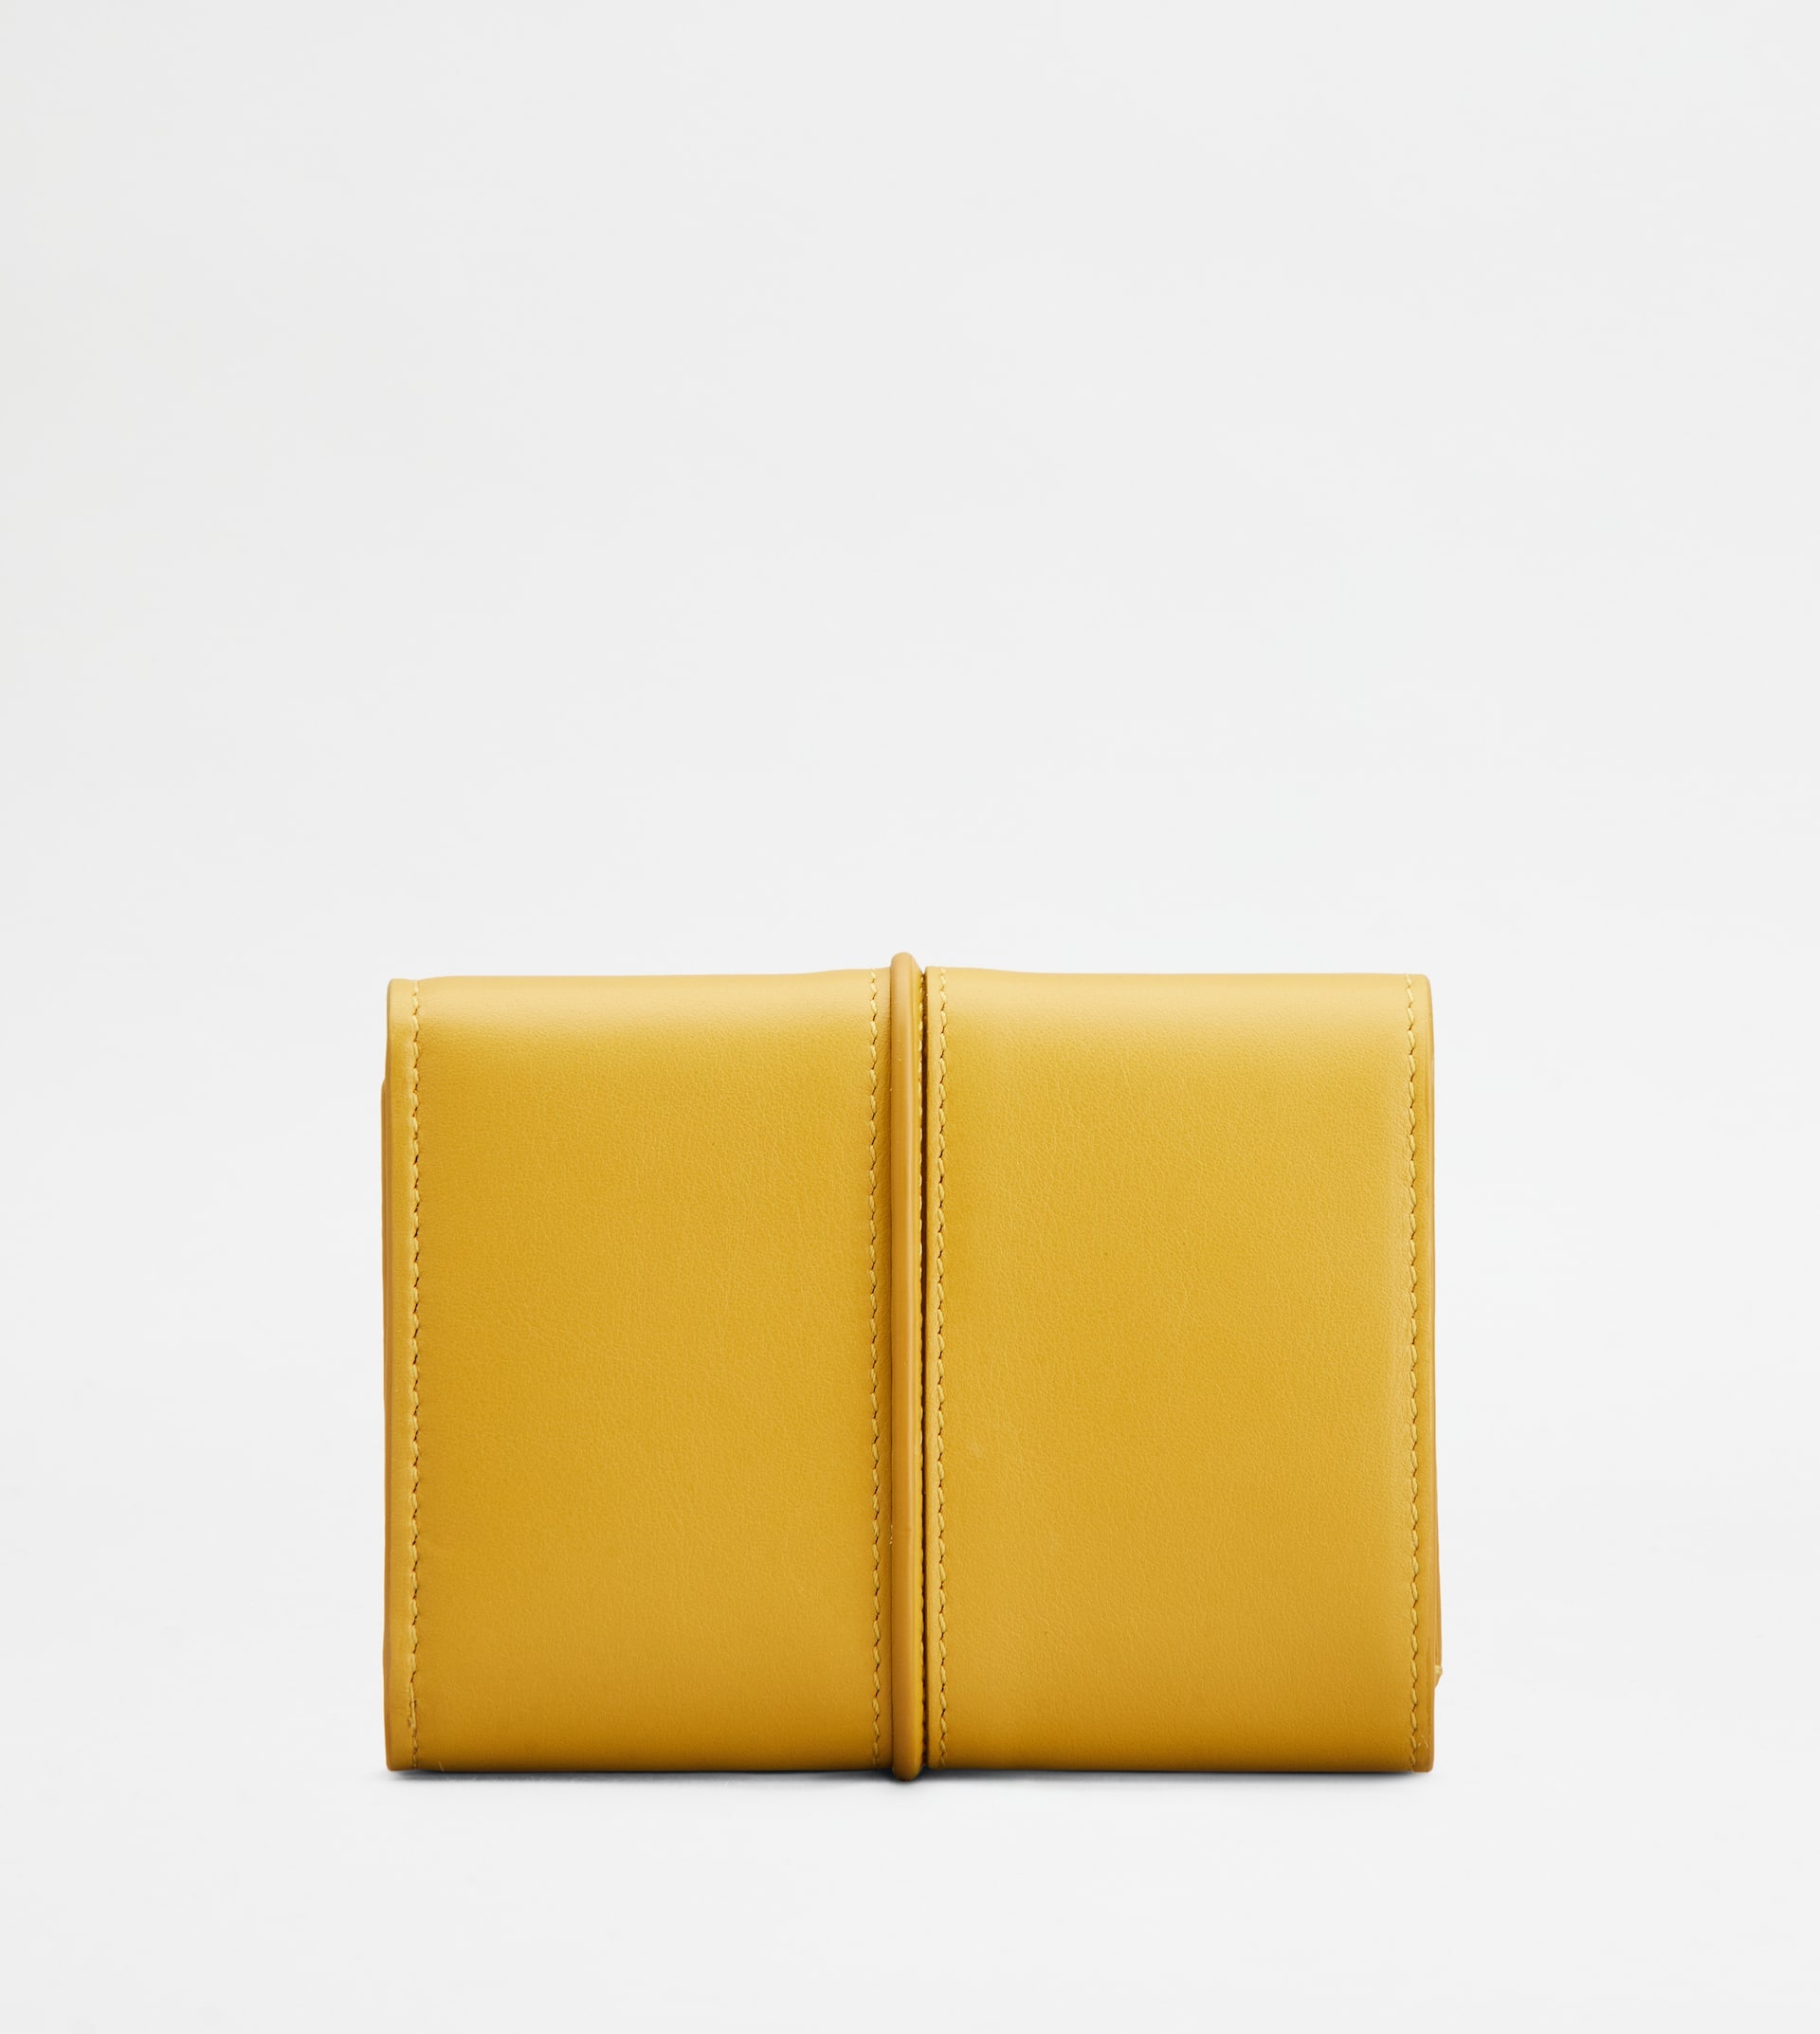 T TIMELESS WALLET IN LEATHER - YELLOW - 3